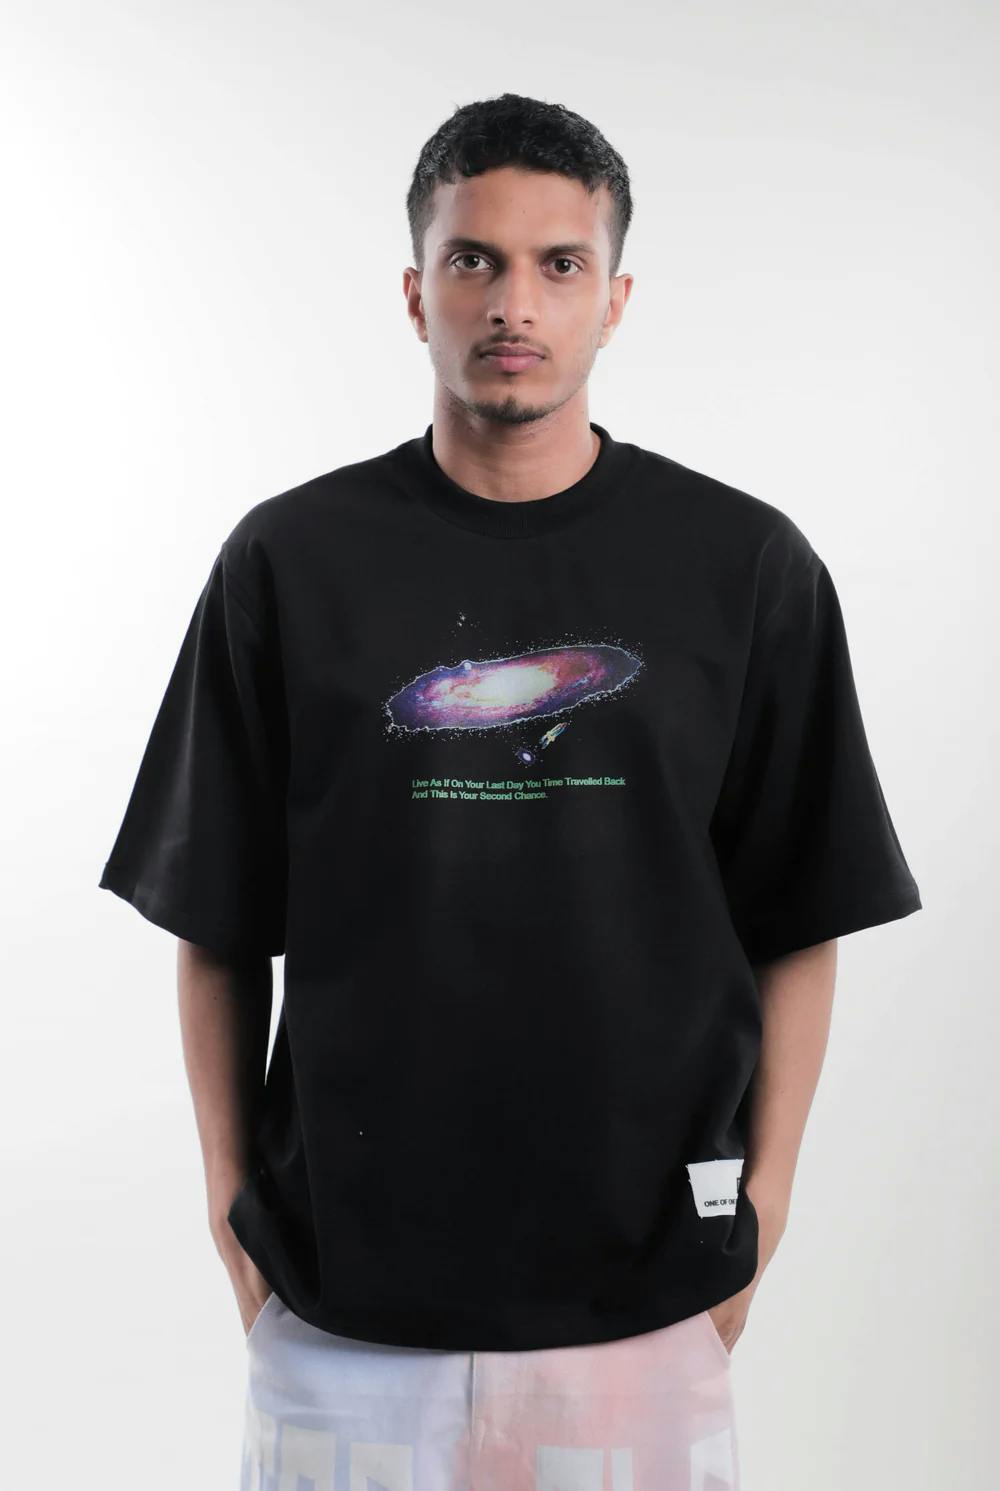 Infinite Universe T-shirt, a product by TOFFLE